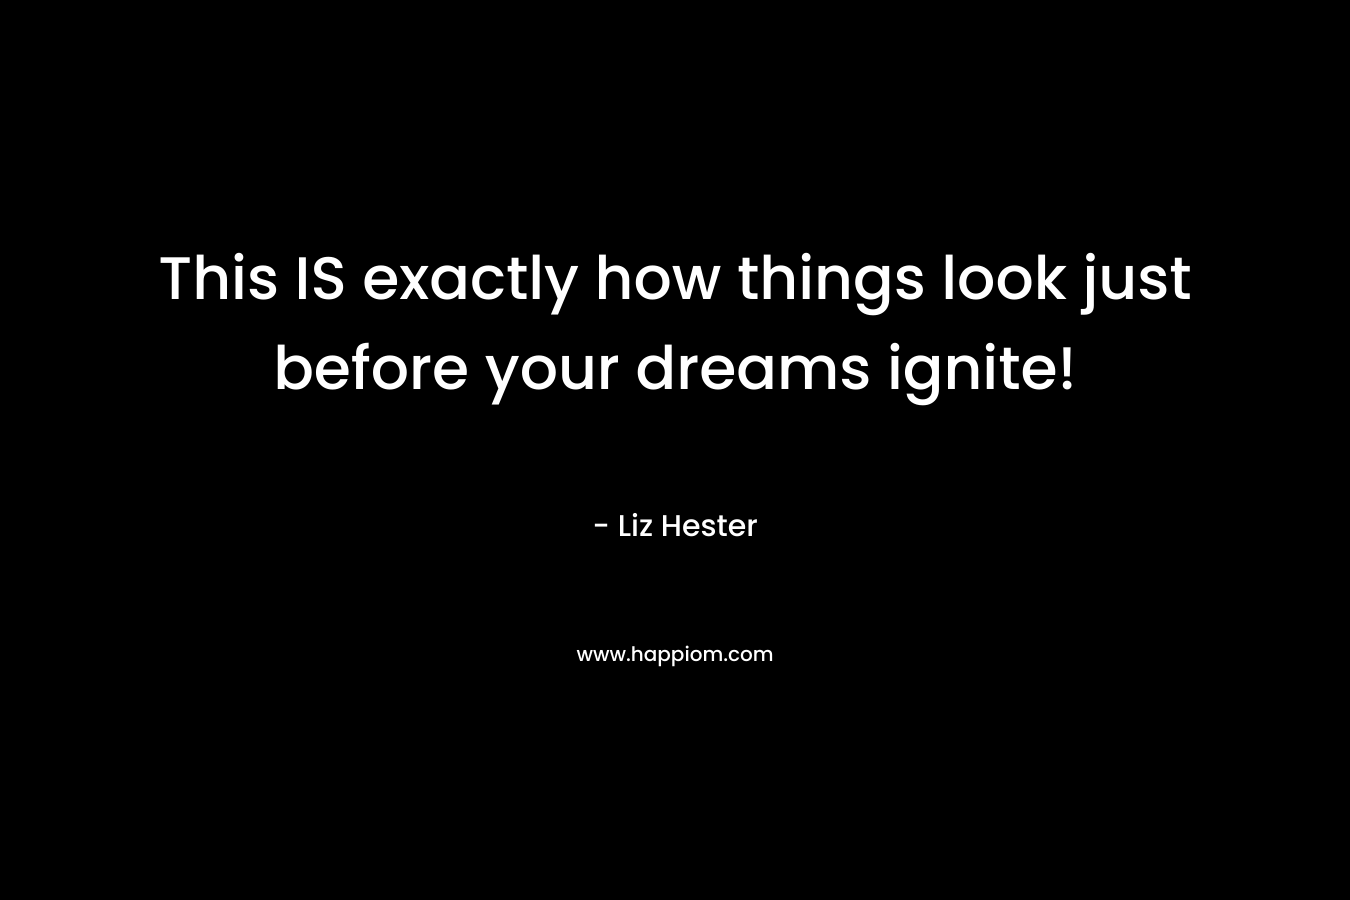 This IS exactly how things look just before your dreams ignite! – Liz Hester